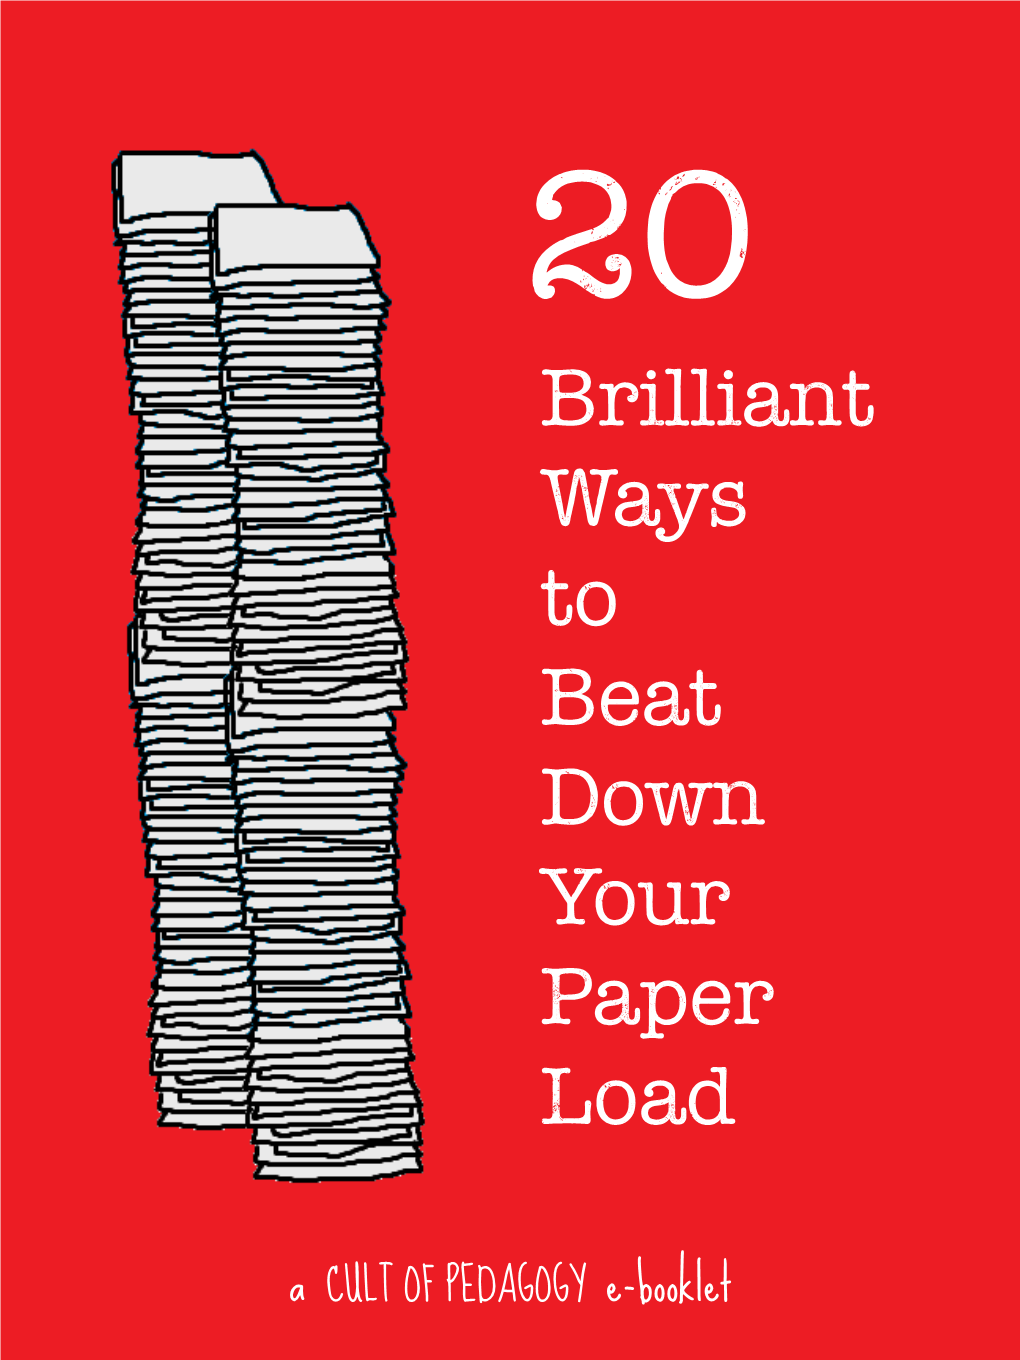 Brilliant Ways to Beat Down Your Paper Load